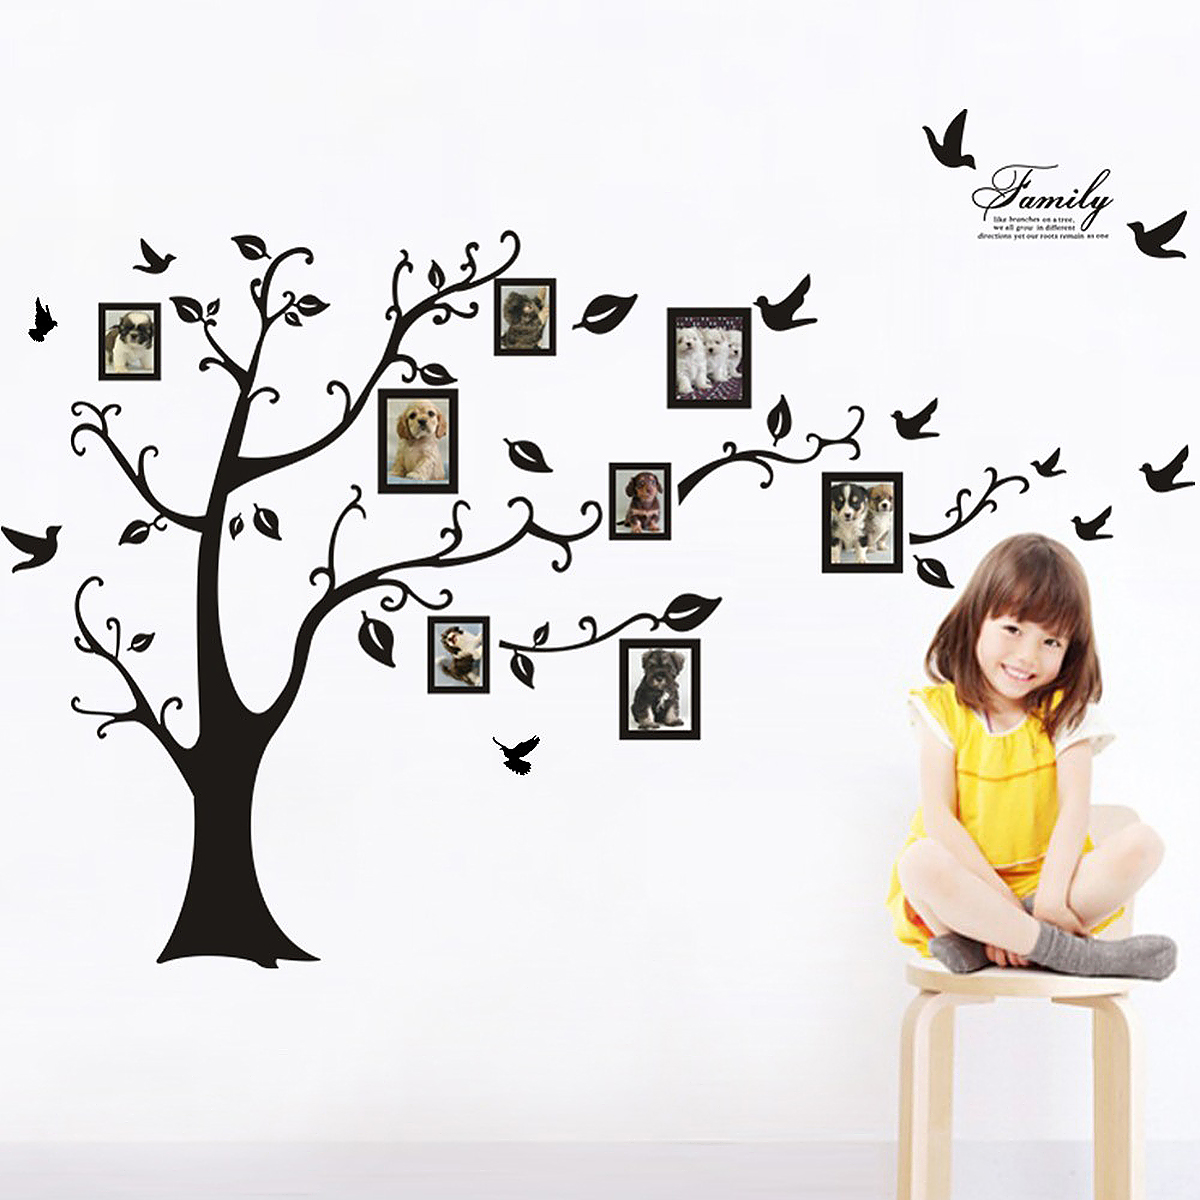 Large Family Memory Tree Wall Decal Sticker Photo Home Decor